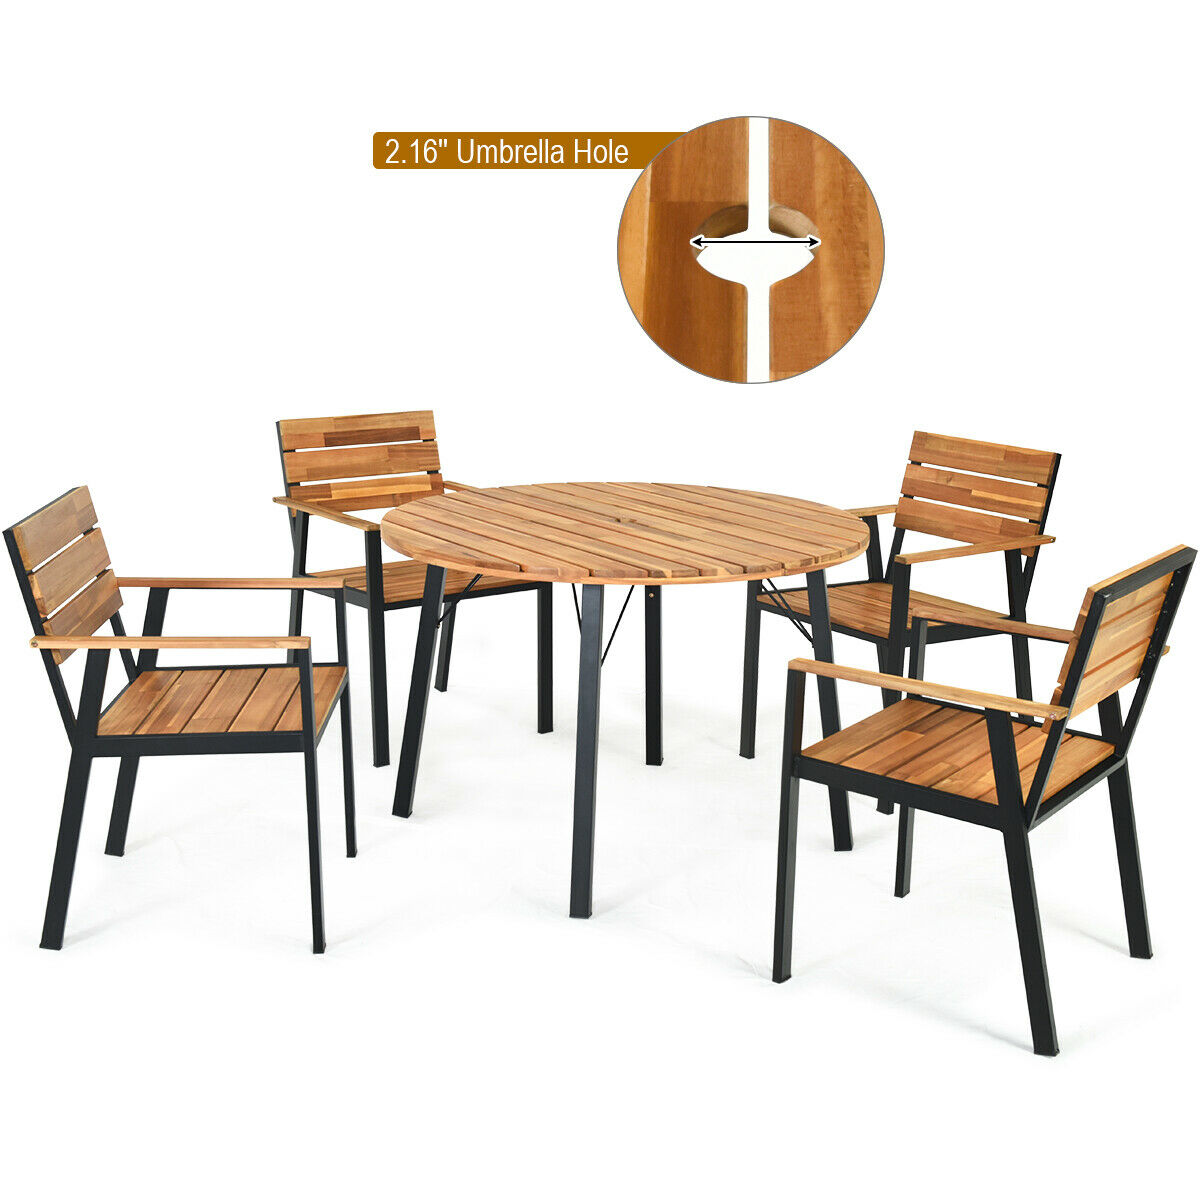 Costway Hw65221 5pcs Patio Dining Chair, Round Patio Table With Umbrella Hole Set